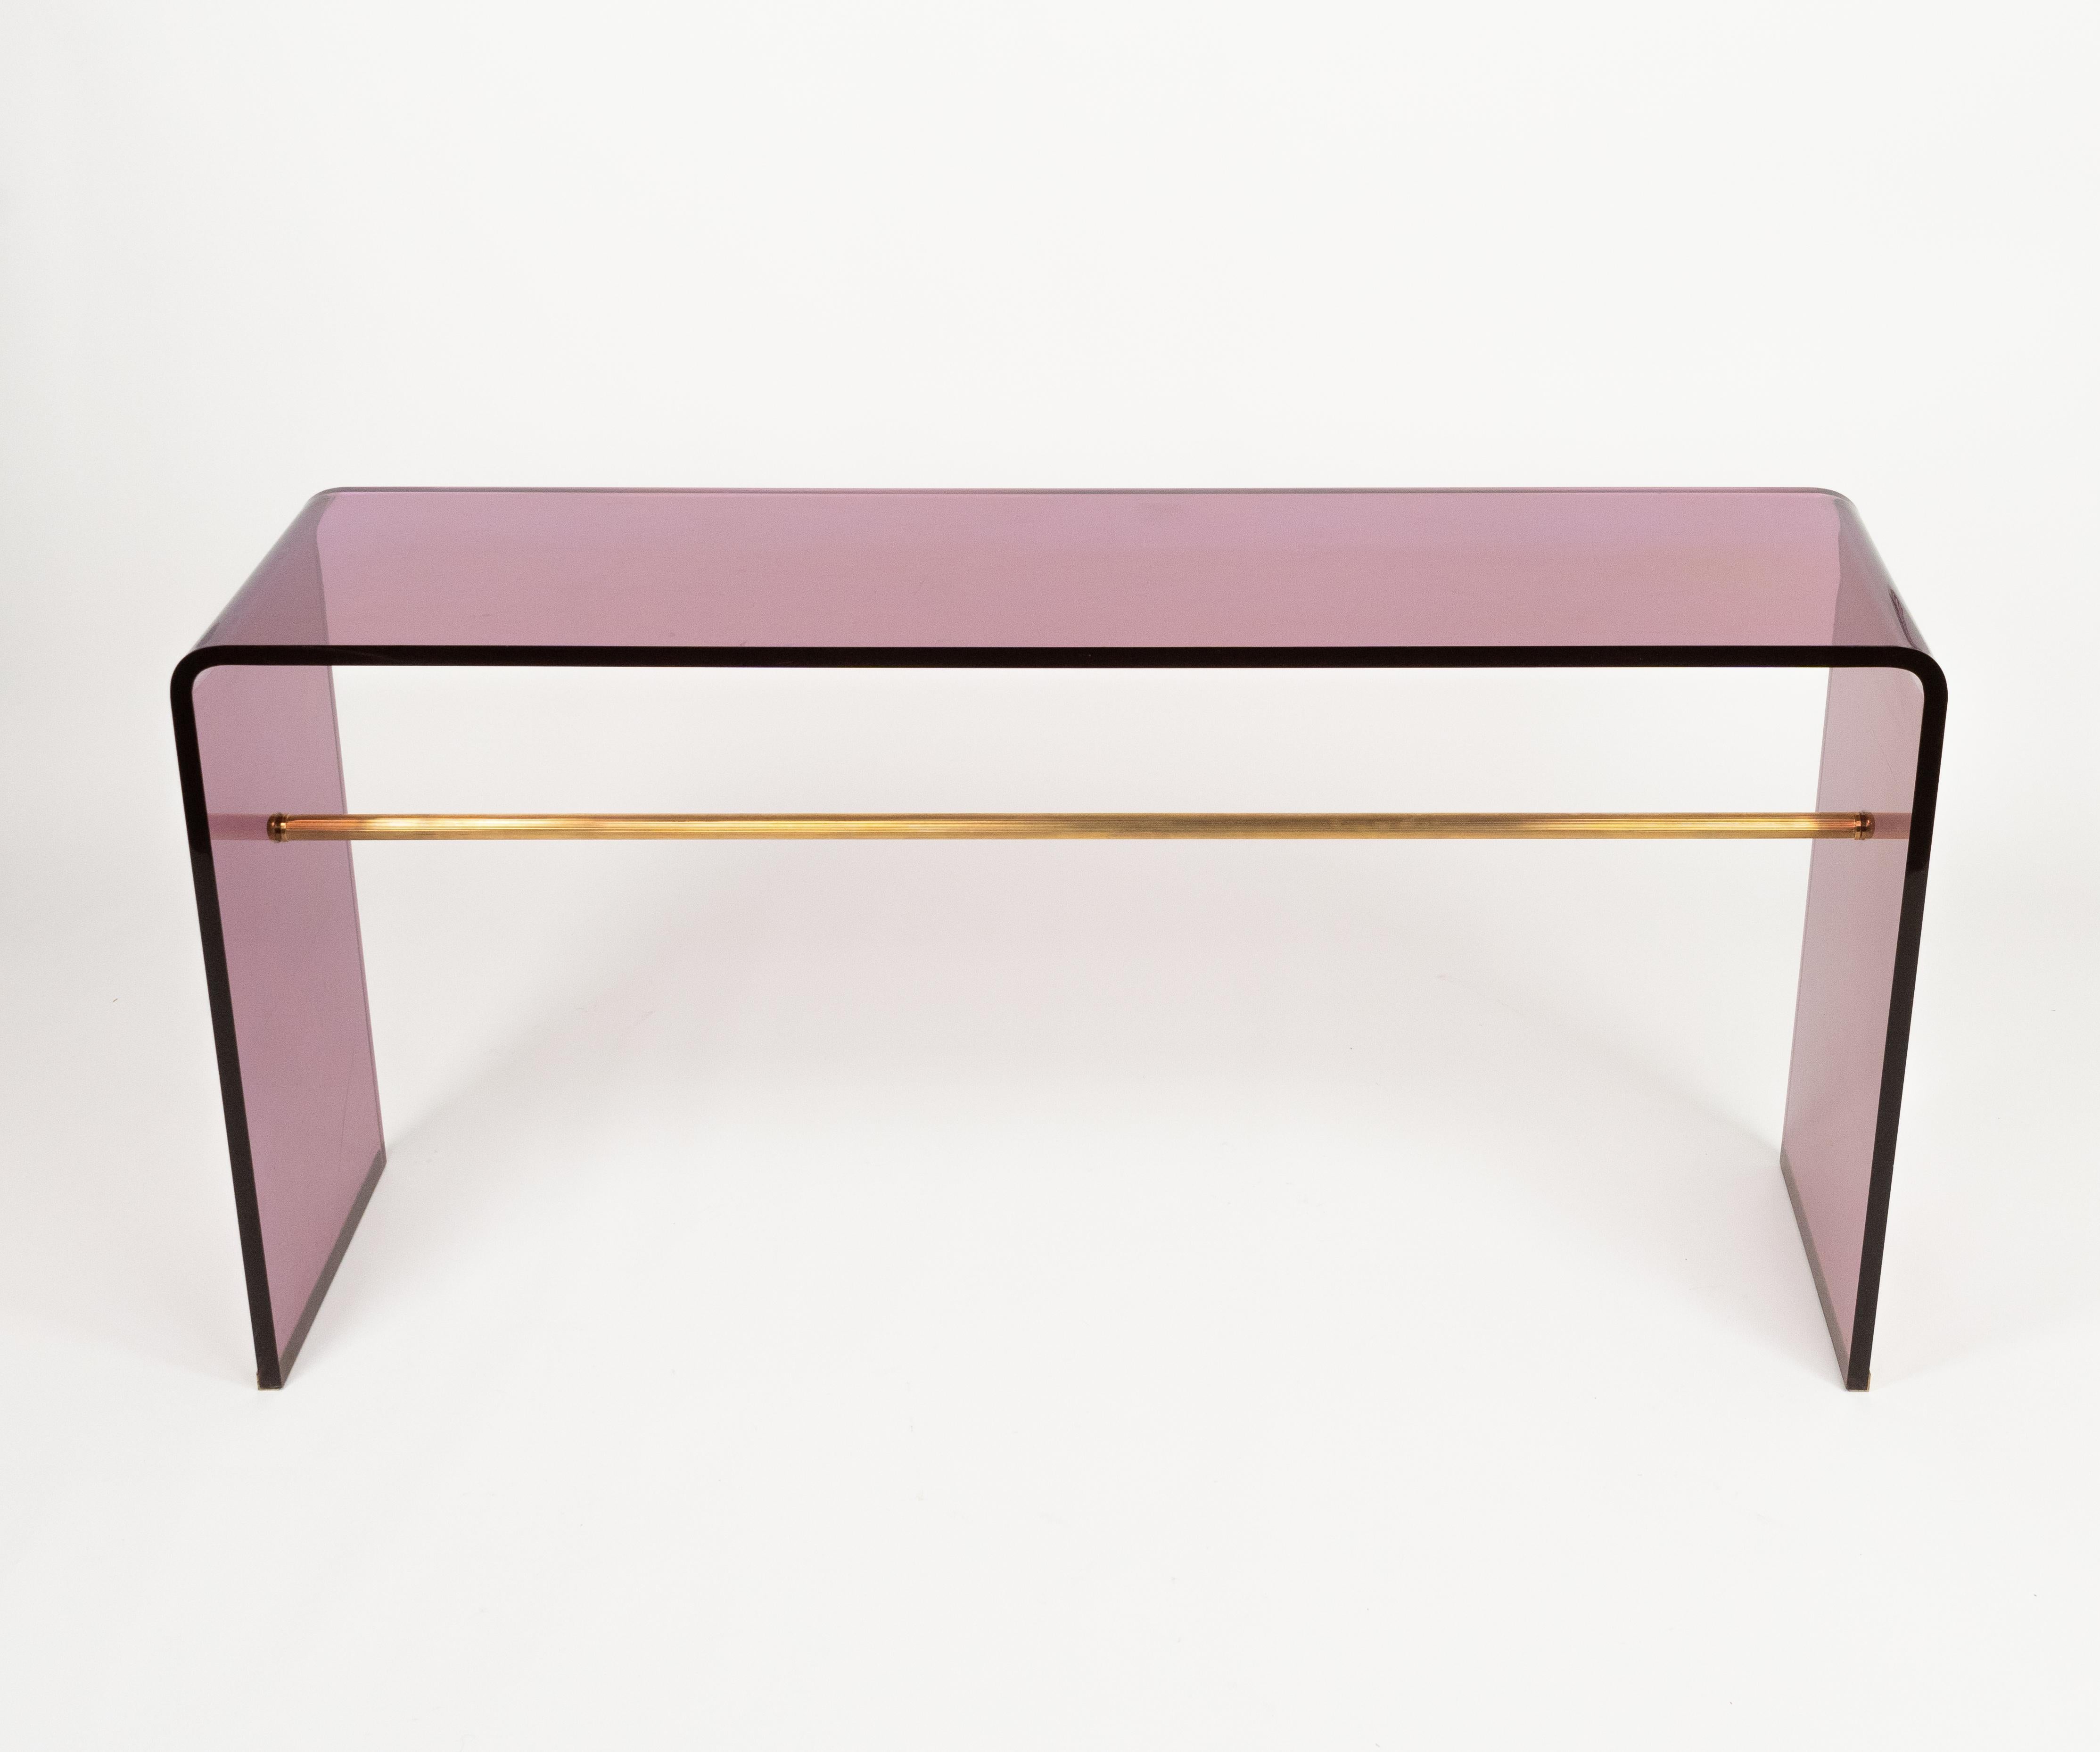 Late 20th Century Console Table in Purple Lucite and Brass Alessandro Albrizzi Style, Italy 1970s For Sale